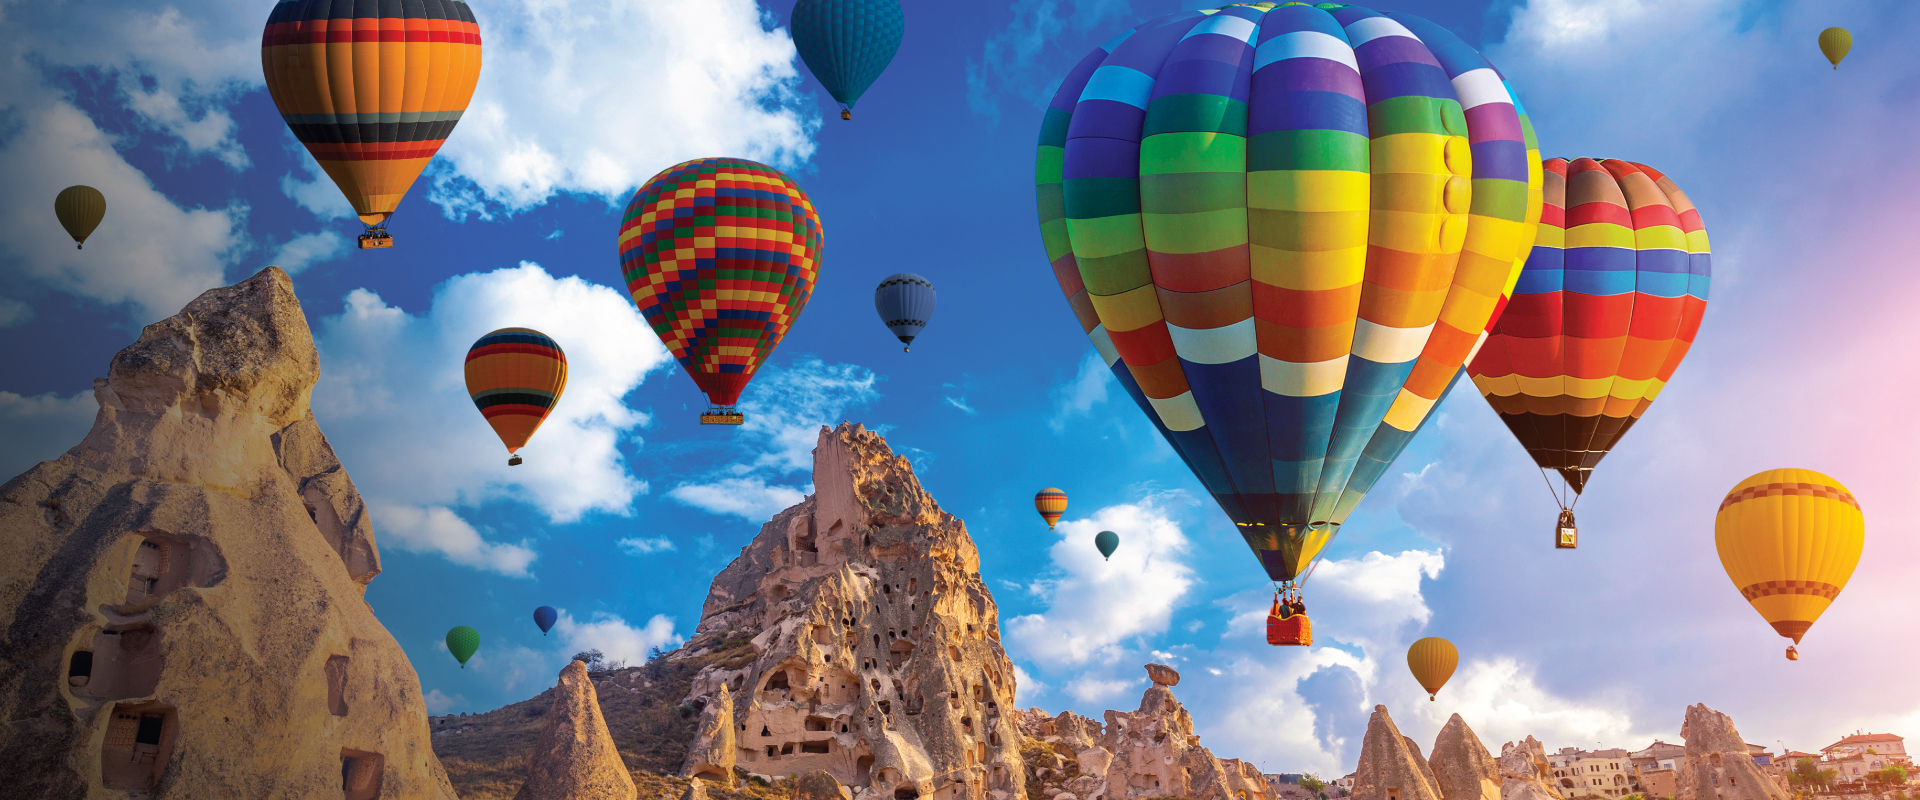 Hot air balloons soaring over Cappadocia, Turkey, captivate self-flying pilots with their own aircraft, offering a breathtaking perspective of Eurasia's stunning landscapes and cultural wonders from the skies above.